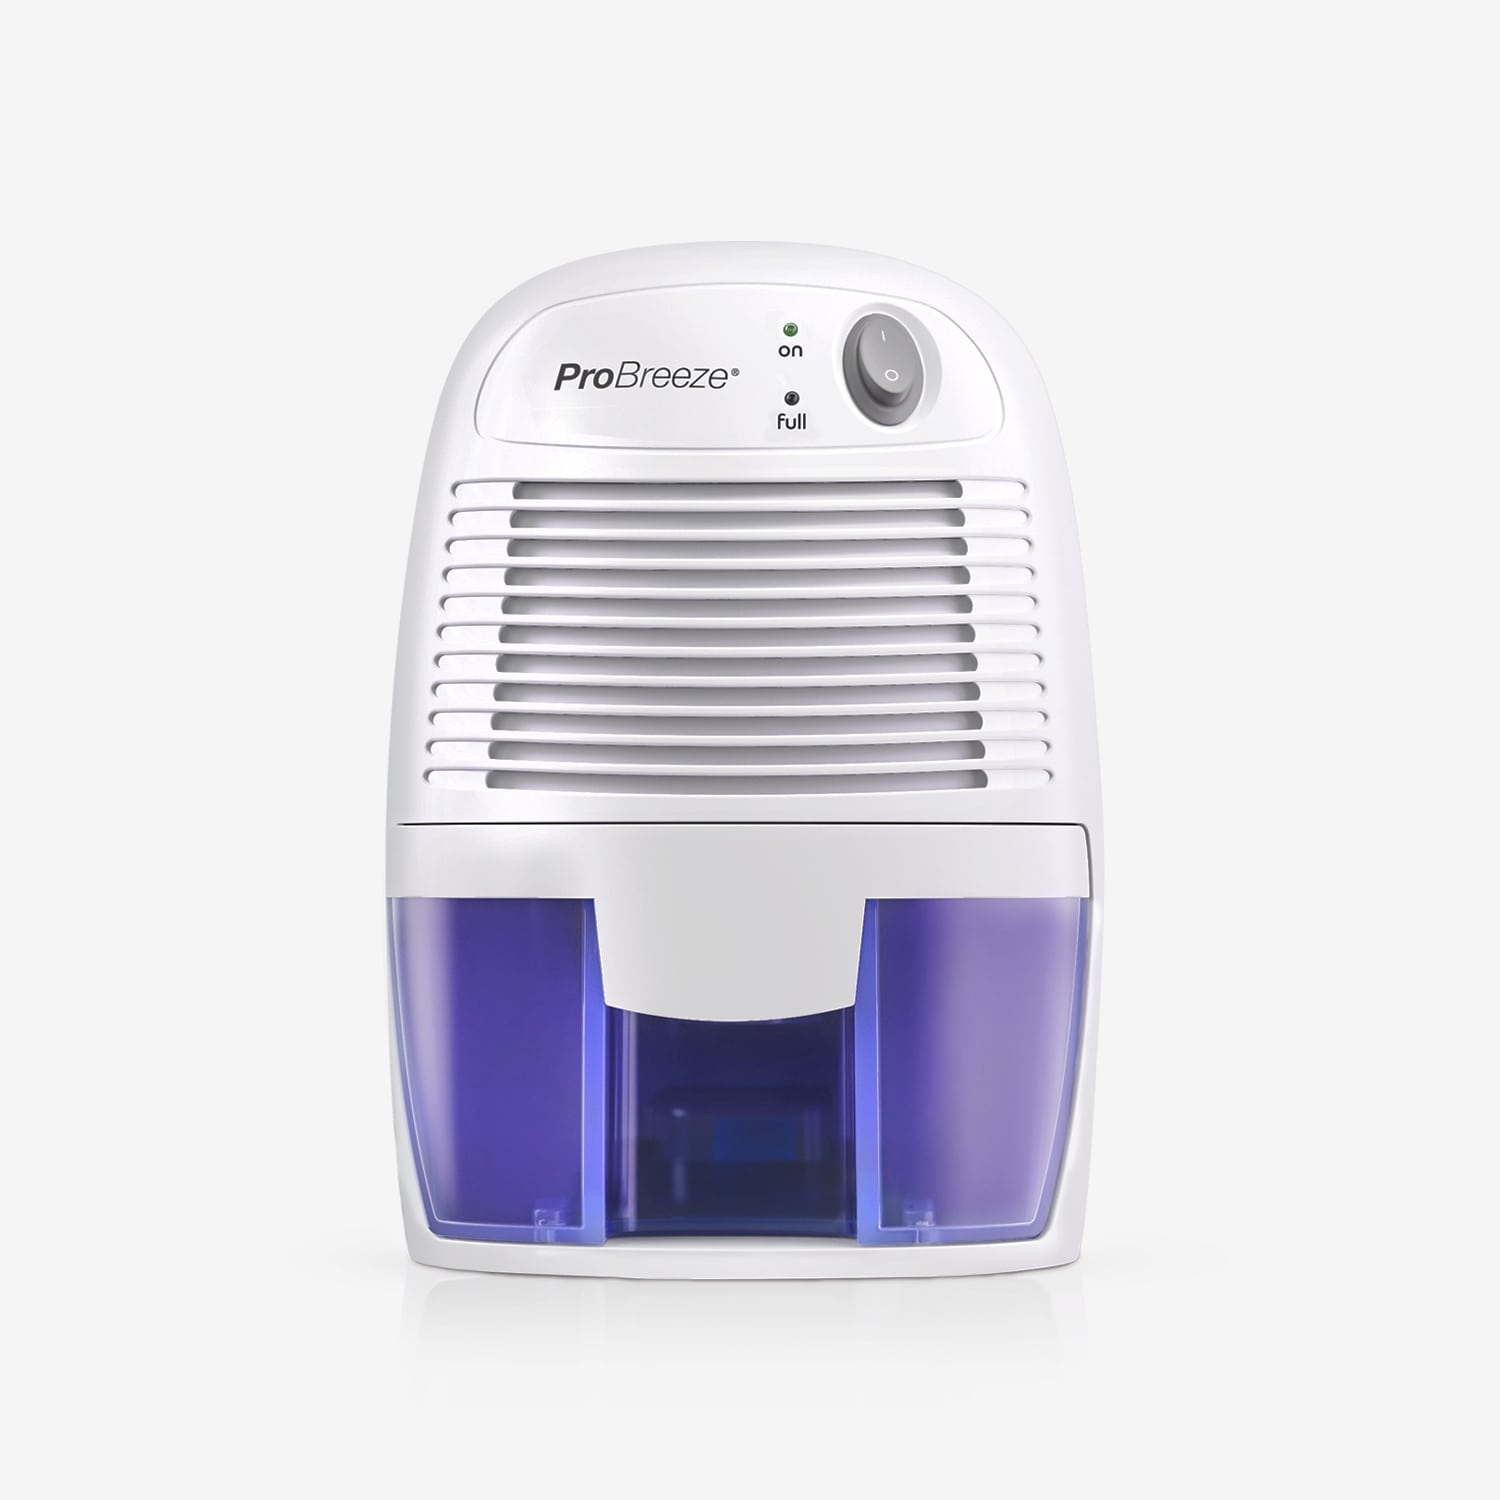 Pro Breeze PB-03-US Electric Mini Dehumidifier, 2200 Cubic Feet, Compact  and Portable for Damp Air, Mold, Moisture in Home, Kitchen, Bedroom,  Basement, Caravan, Office, Garage 